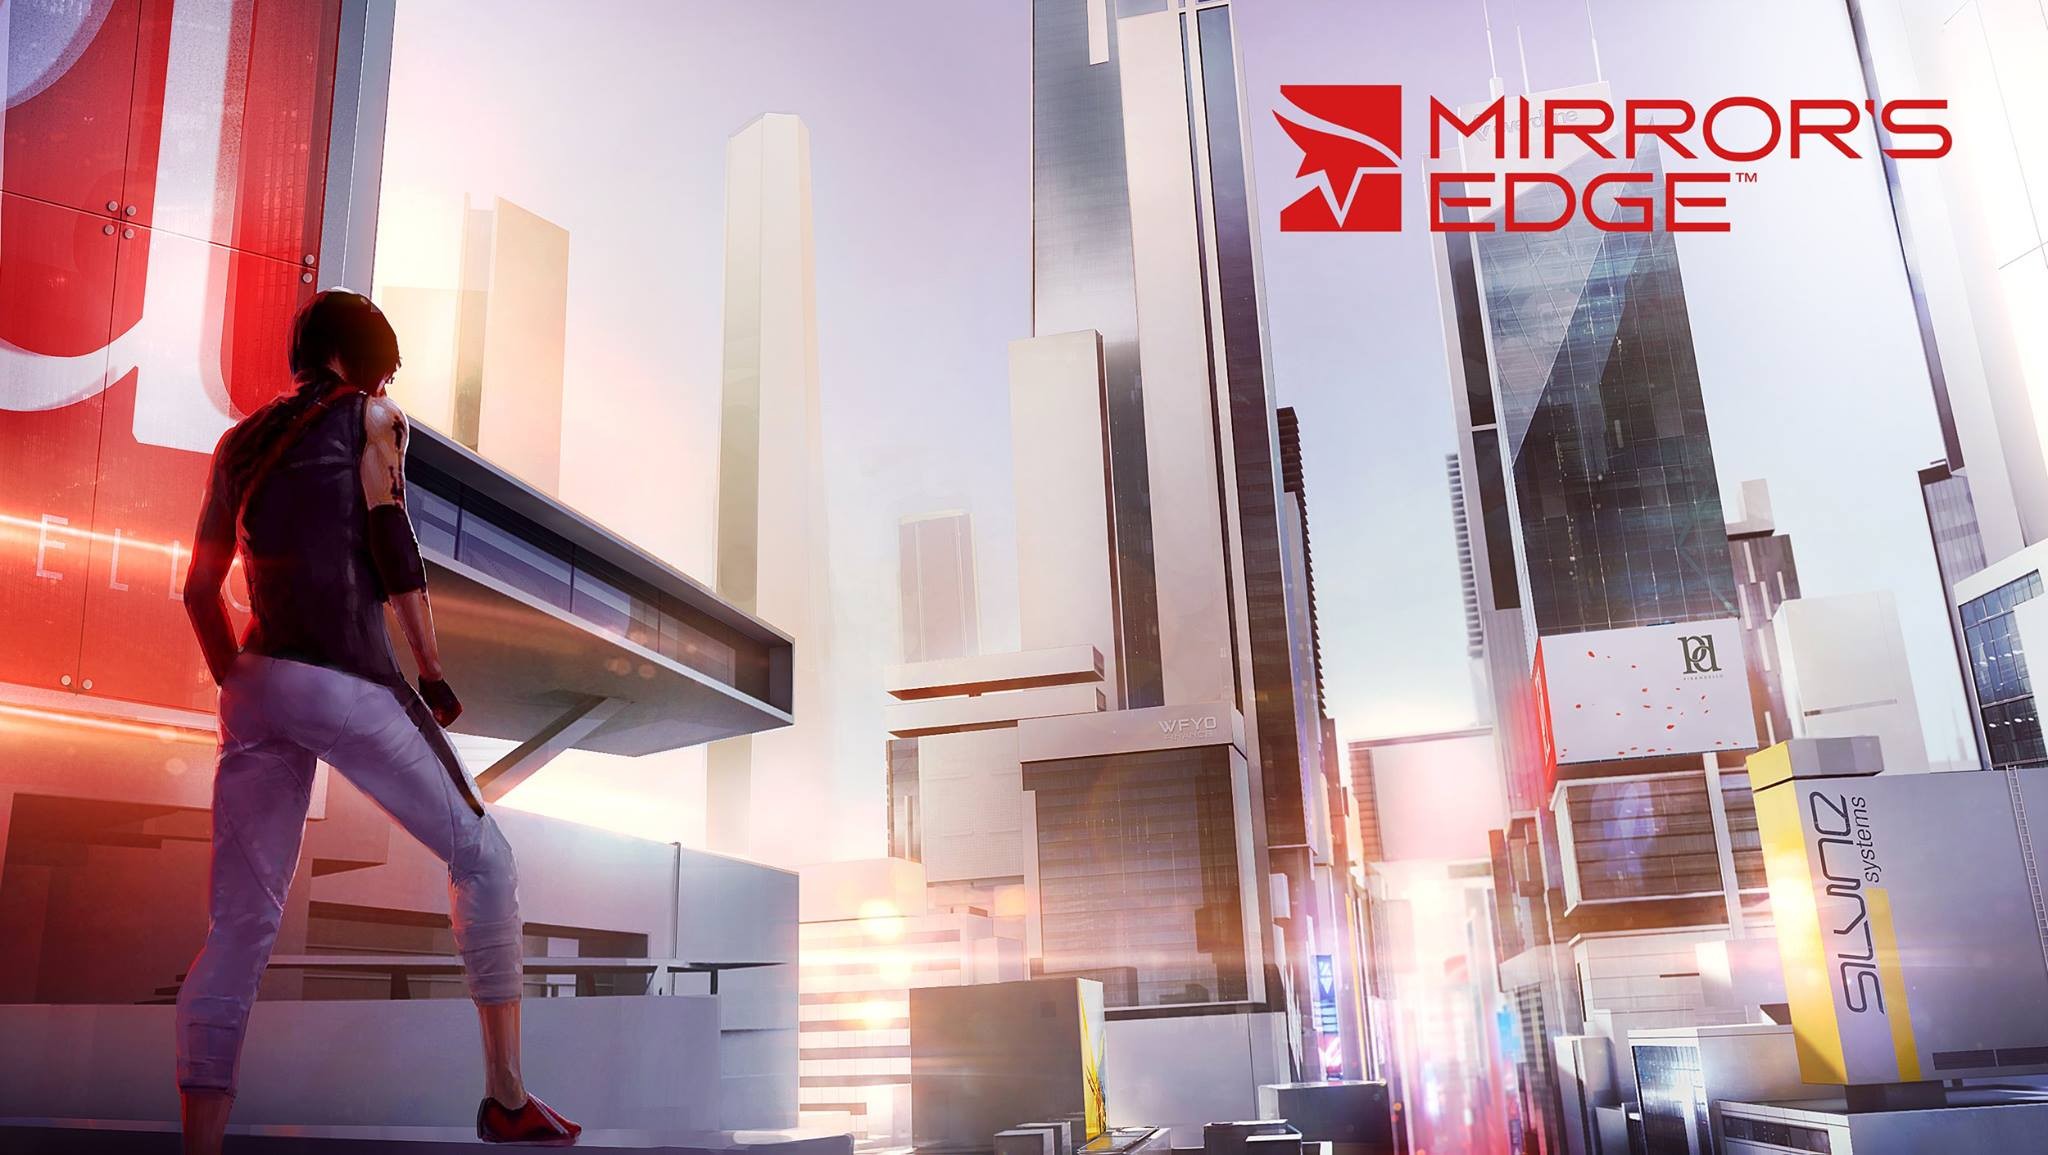 General 2048x1155 building Mirror's Edge video games PC gaming video game art video game girls Faith Connors